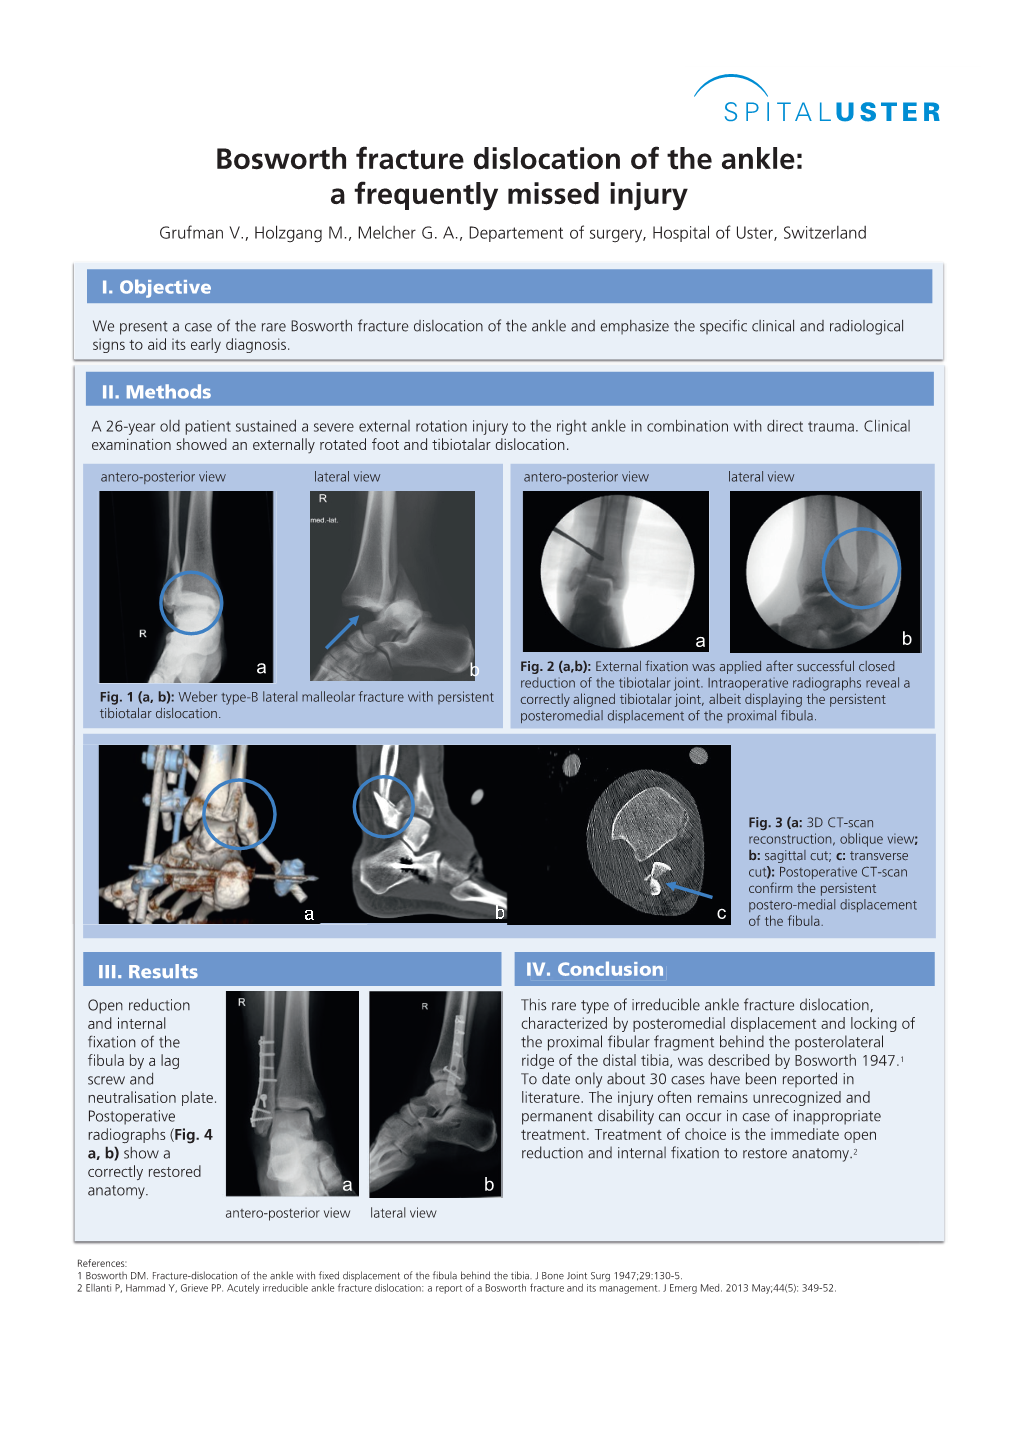 Bosworth Fracture Dislocation of the Ankle: a Frequently Missed Injury Grufman V., Holzgang M., Melcher G